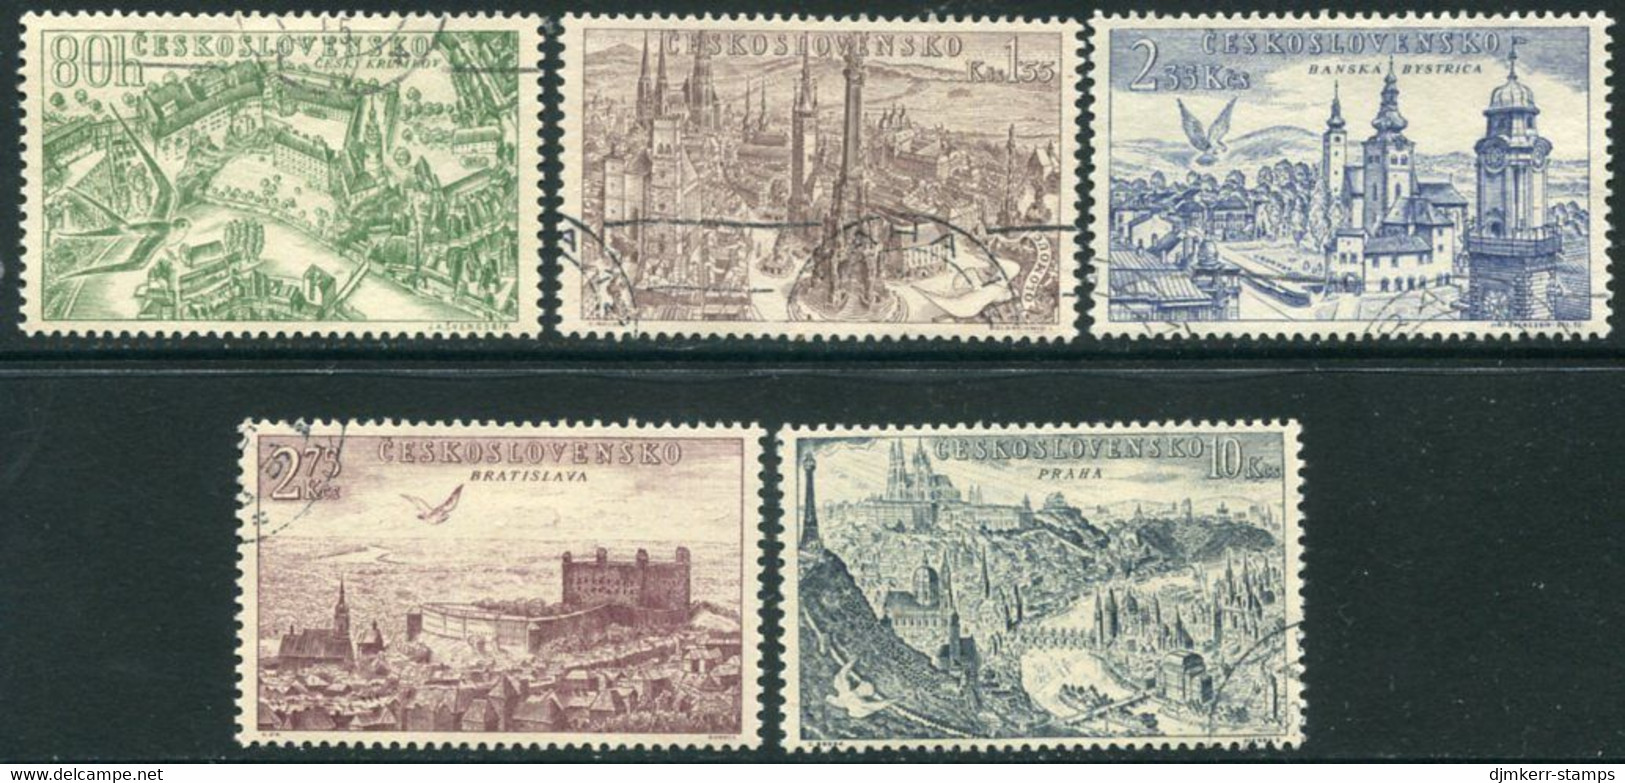 CZECHOSLOVAKIA 1955 City Views Used.  Michel 894-98 - Used Stamps